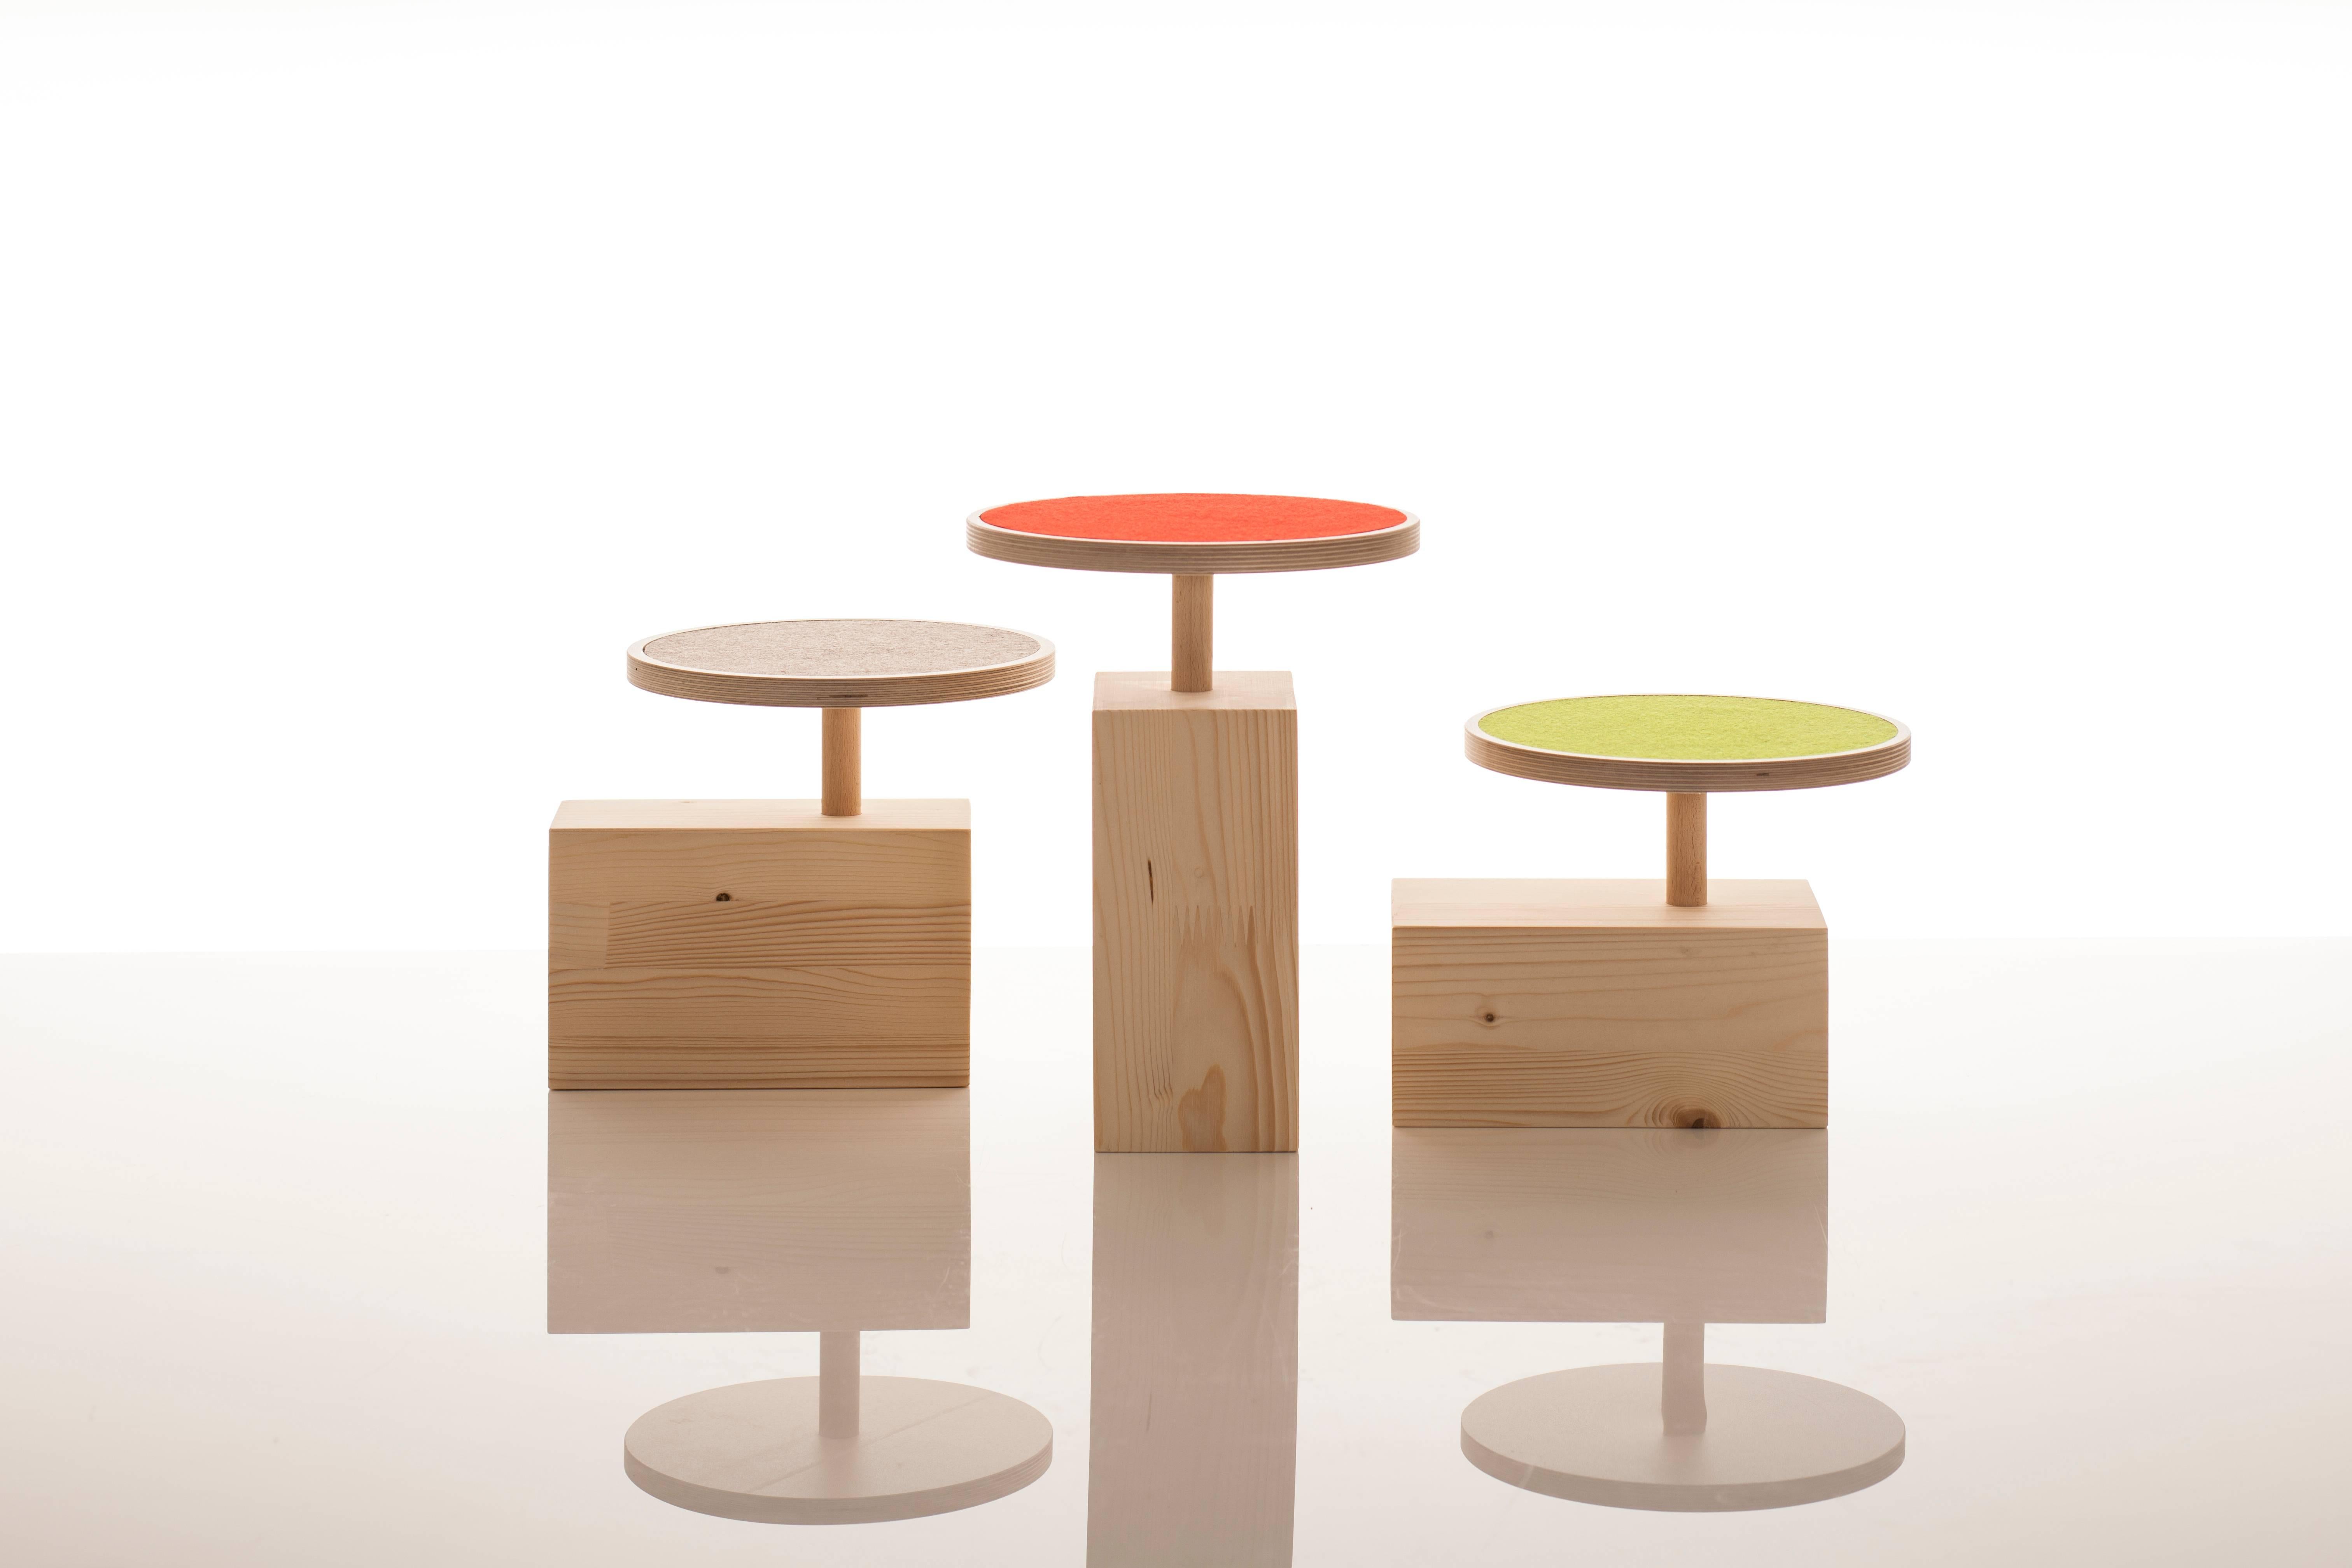 Adjustable green claus child stool by Sirch and Bitzer in spruce and felt

Designed by W. Sirch and C. Bitzer
Contemporary, Germany, 2012
Spruce, Felt
Wood block: H 6 in, W 4.75 in, L 10 in 
Seat diameter: 10.5 in
Adjustable seat heights: 8.5